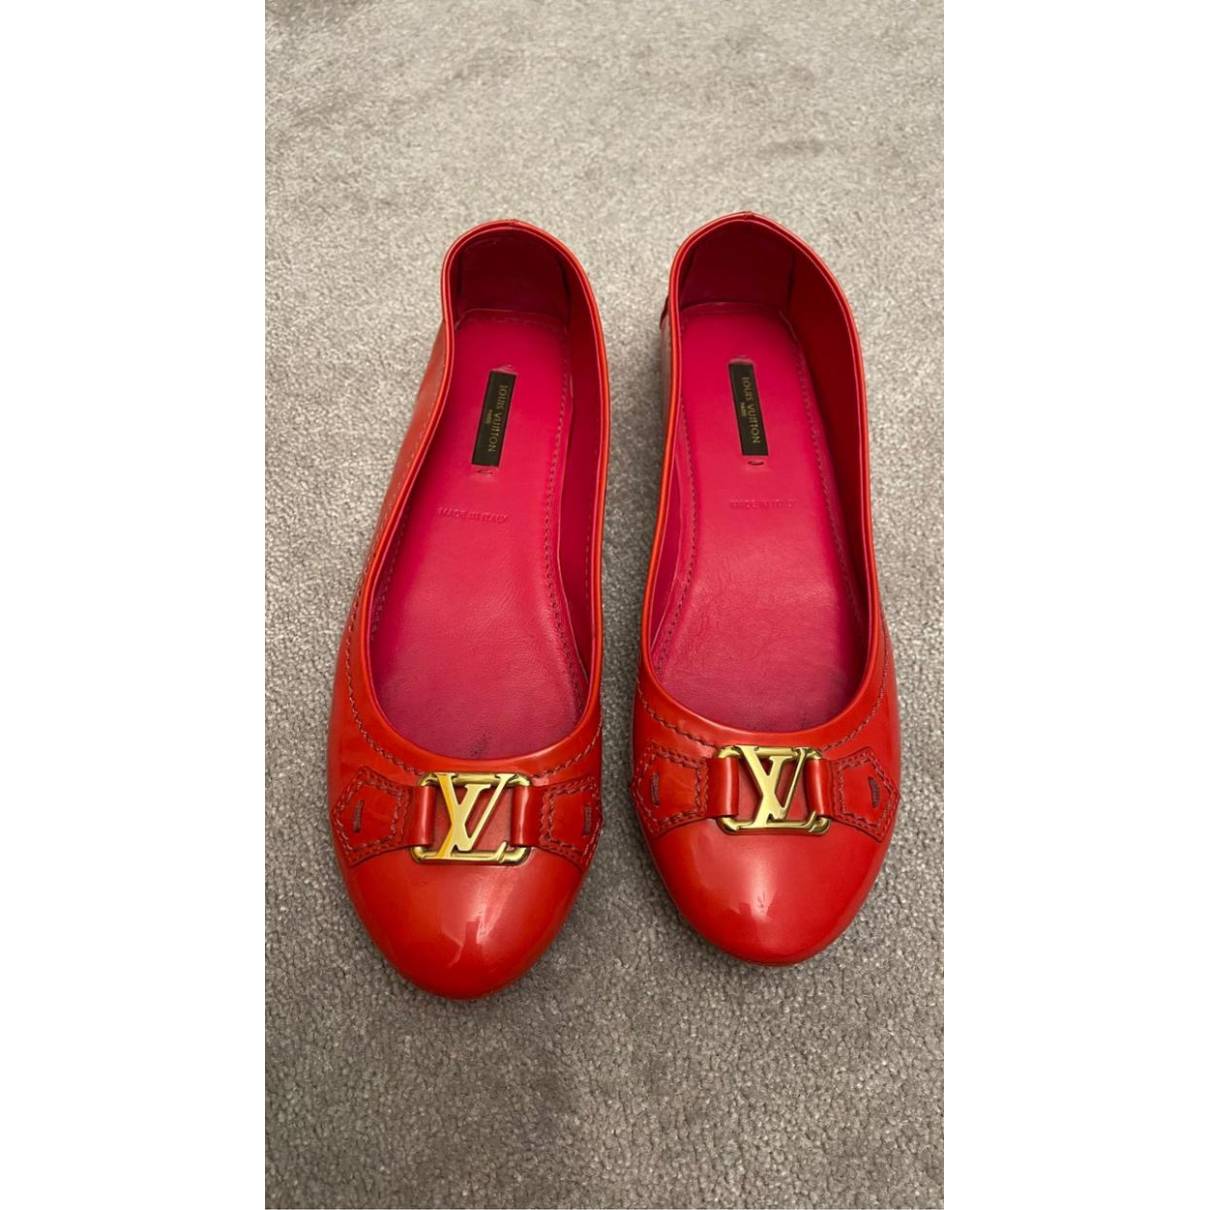 price lv flat shoes